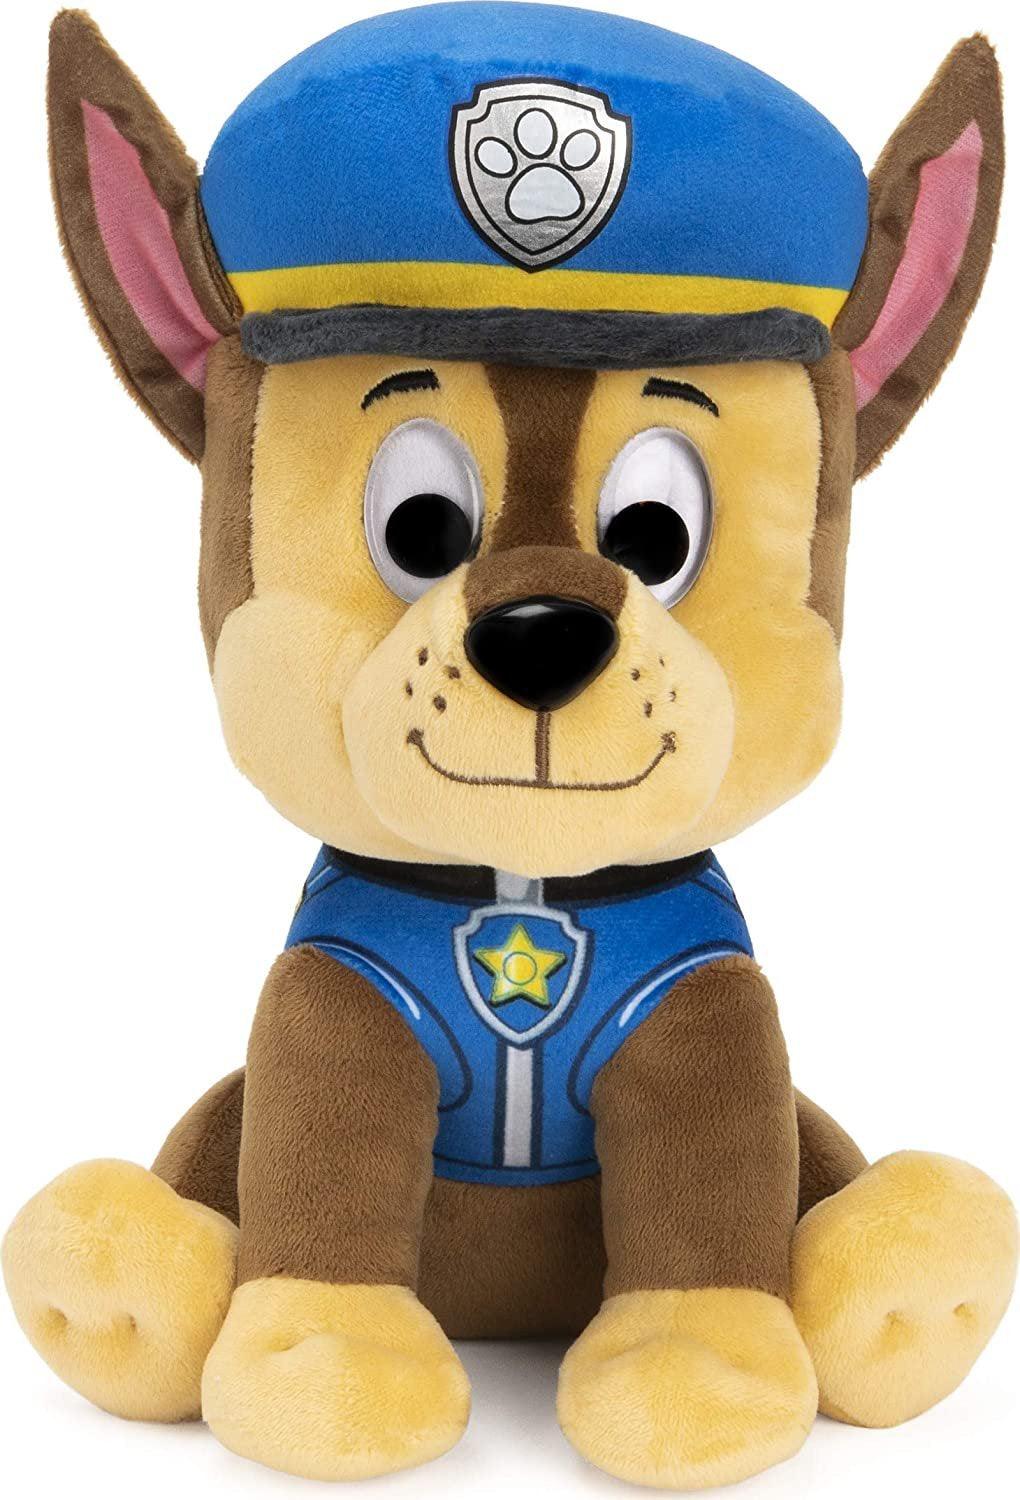 Paw Patrol Chase in Signature Police Officer Uniform 9